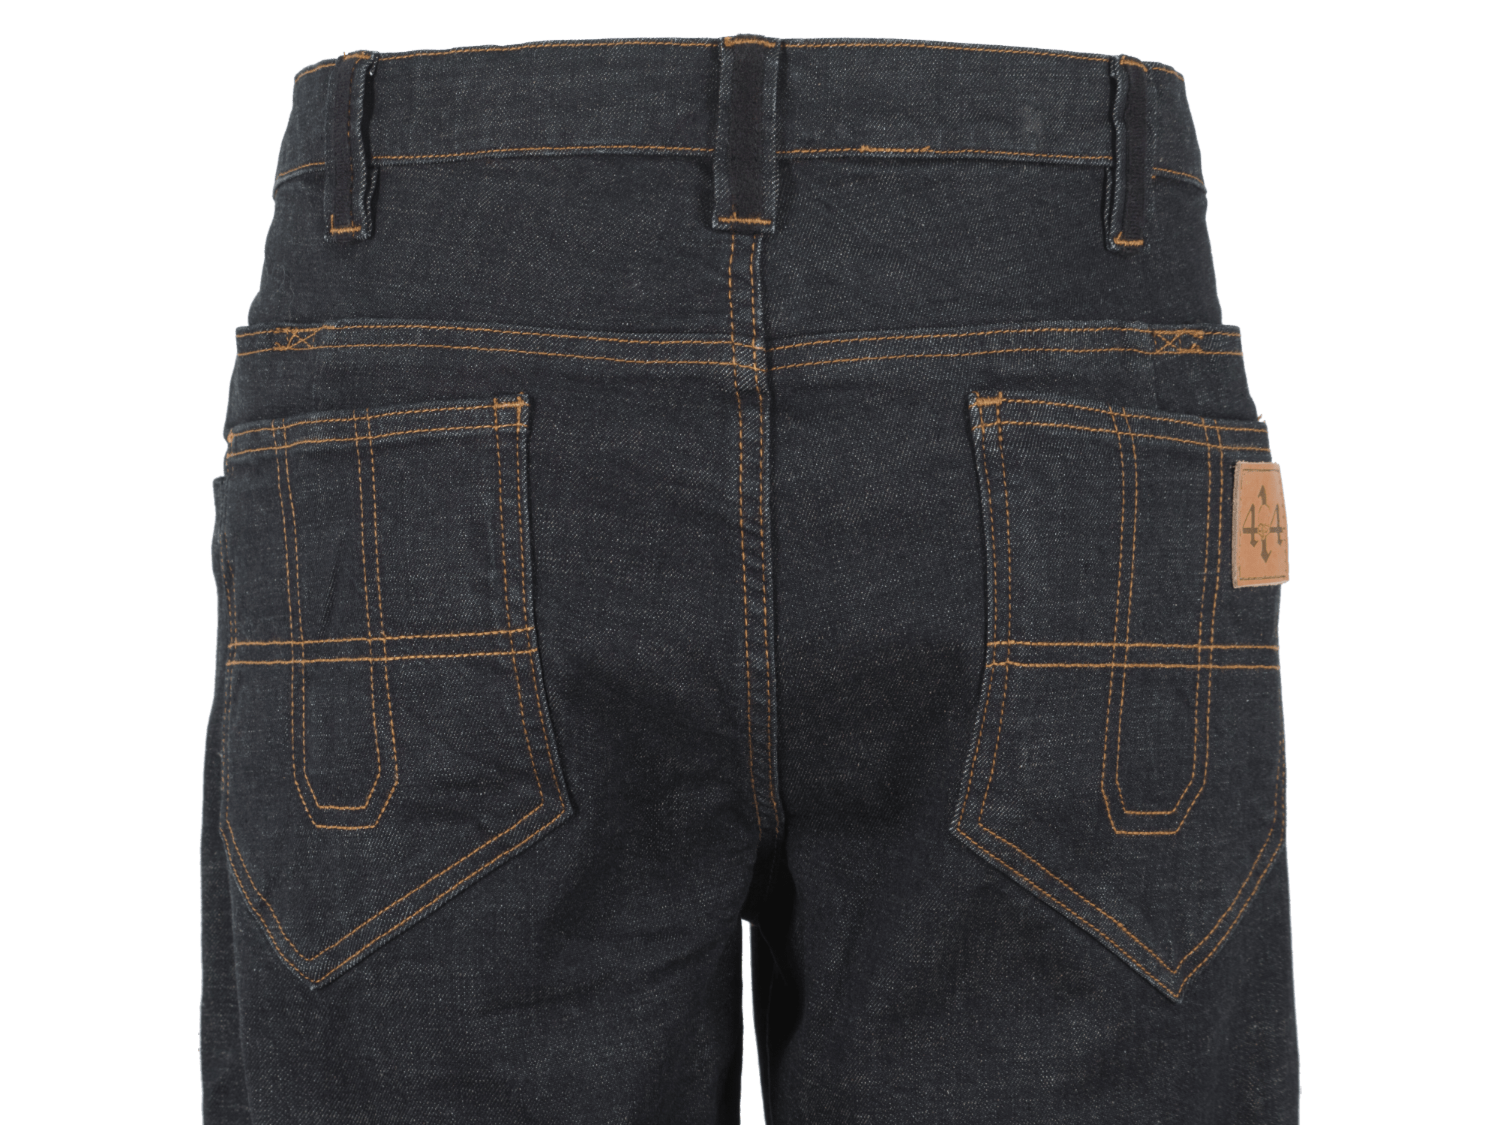 JEANS “GHOST”